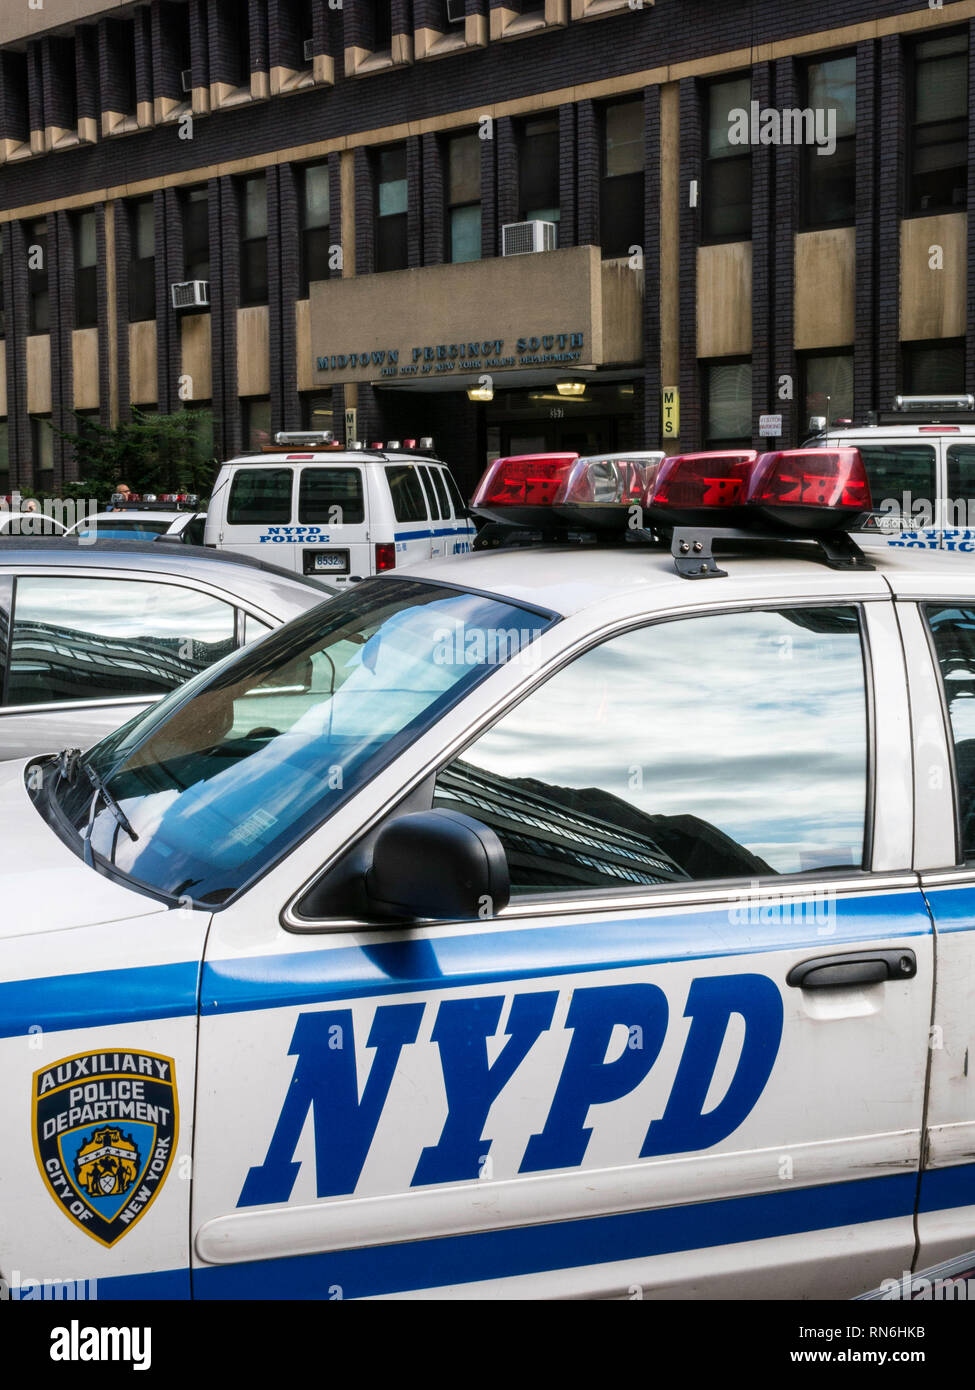 Police vehicles parked in front of Midtown Precinct South, New York City, USA Stock Photo